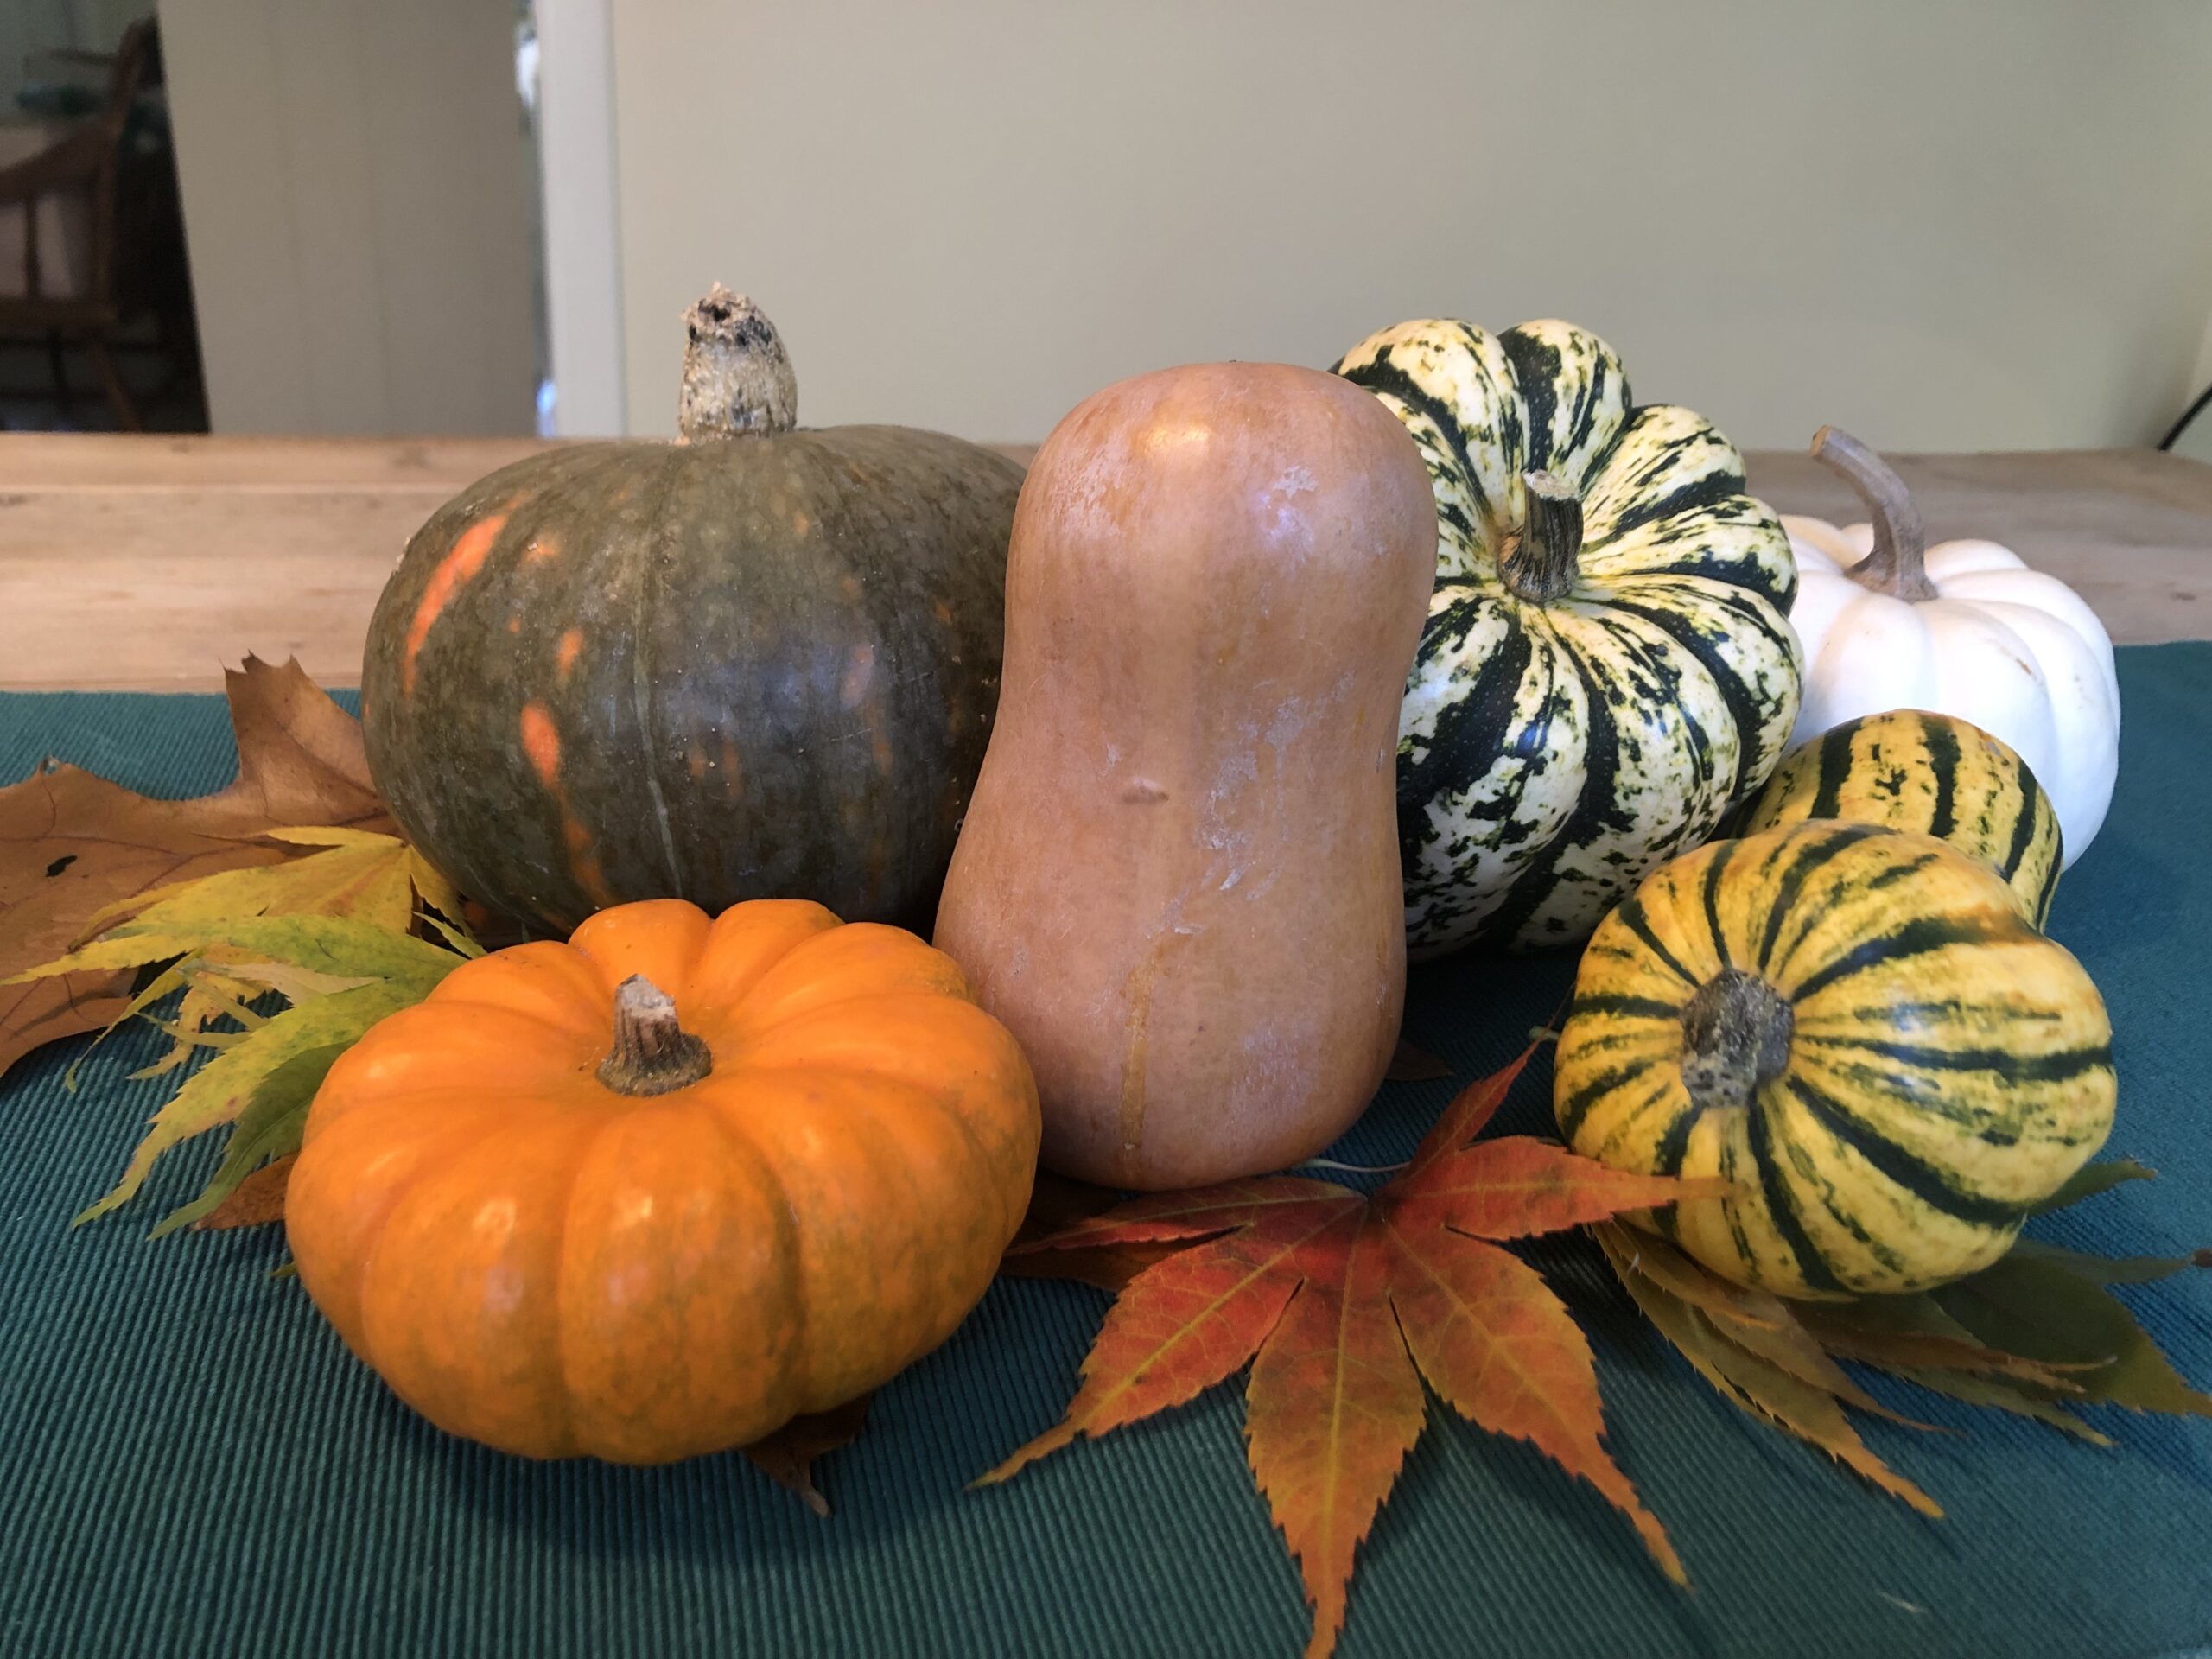 Since all gourds are squash, consider the Thanksgiving centerpiece as part of holiday leftovers. And all seeds (not just pumpkin) can be toasted. JENNY NOBLE